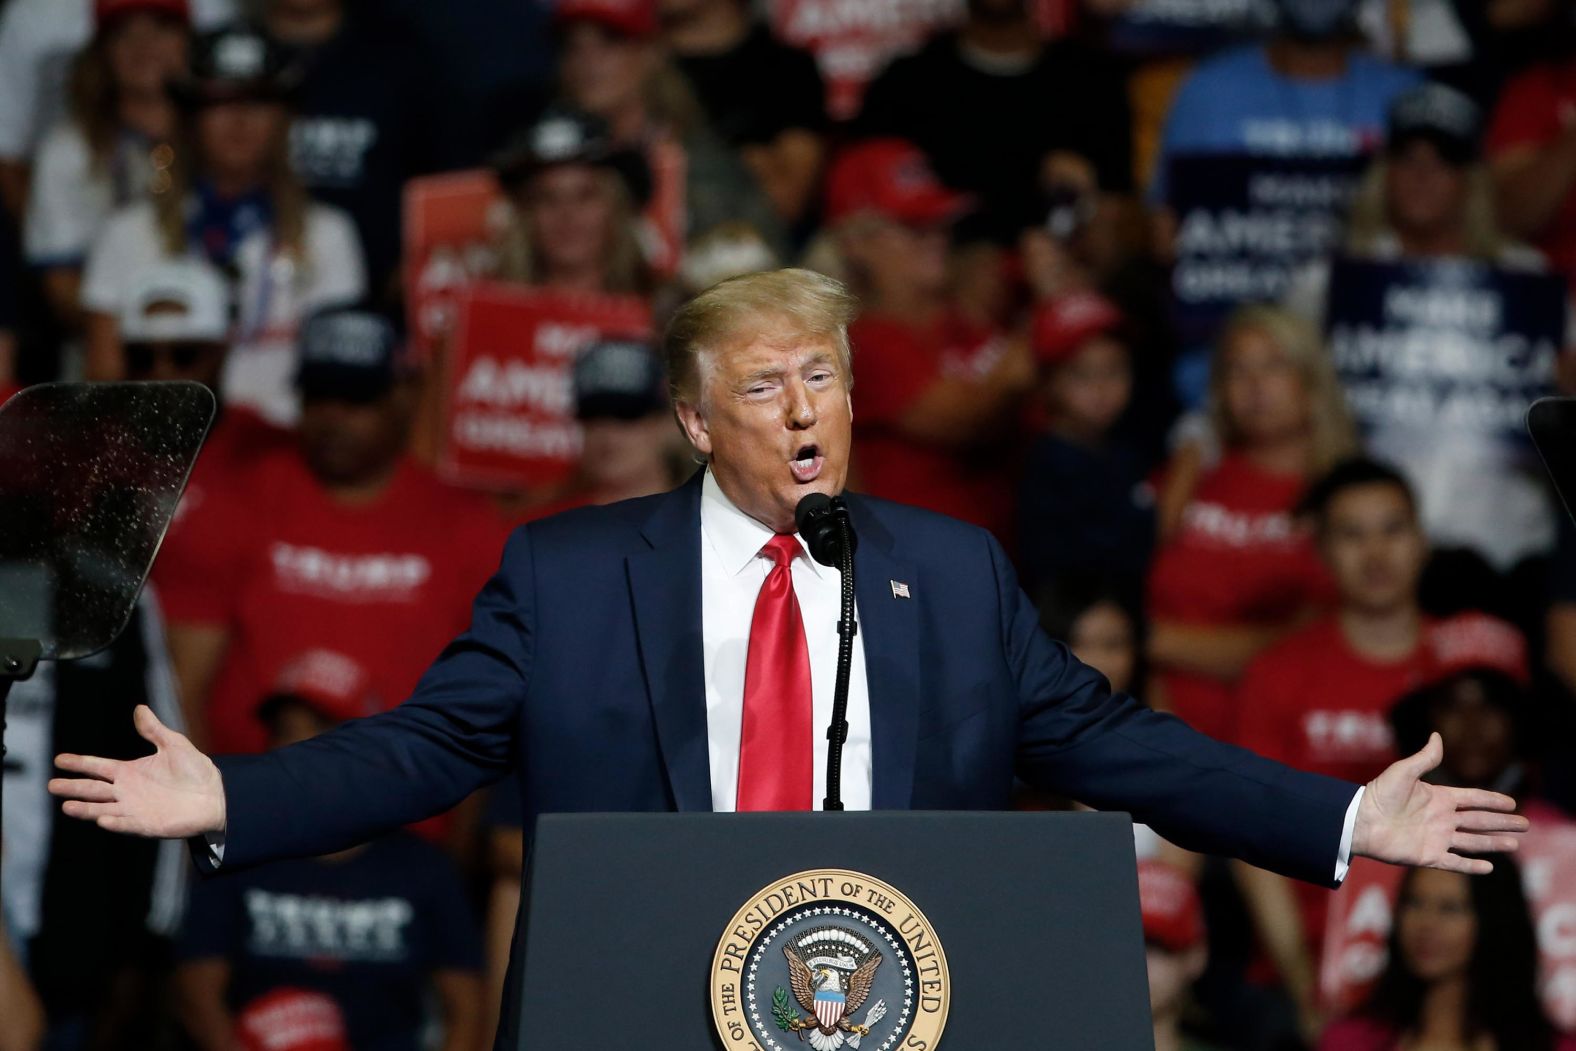 "Five months from now we're going to defeat Sleepy Joe Biden," Trump said before mocking former Vice President Joe Biden by suggesting that Biden often doesn't know what state he's campaigning in. Trump criticized the media for failing to give him credit for the number of Americans who have now been tested for Covid-19. He also said he told officials in his administration <a href="index.php?page=&url=https%3A%2F%2Fwww.cnn.com%2F2020%2F06%2F20%2Fpolitics%2Ftulsa-rally-trump%2Findex.html" target="_blank">to slow down testing</a> because of the rising number of cases in America. "You know testing is a double-edged sword," Trump said while complaining about media coverage of his handling of the virus. "Here's the bad part ... when you do testing to that extent, you're going to find more people; you're going to find more cases. So I said to my people, slow the testing down please." After Trump made the comment about testing, an administration official told CNN that the president was "obviously kidding" when he said that he asked for a slowdown.